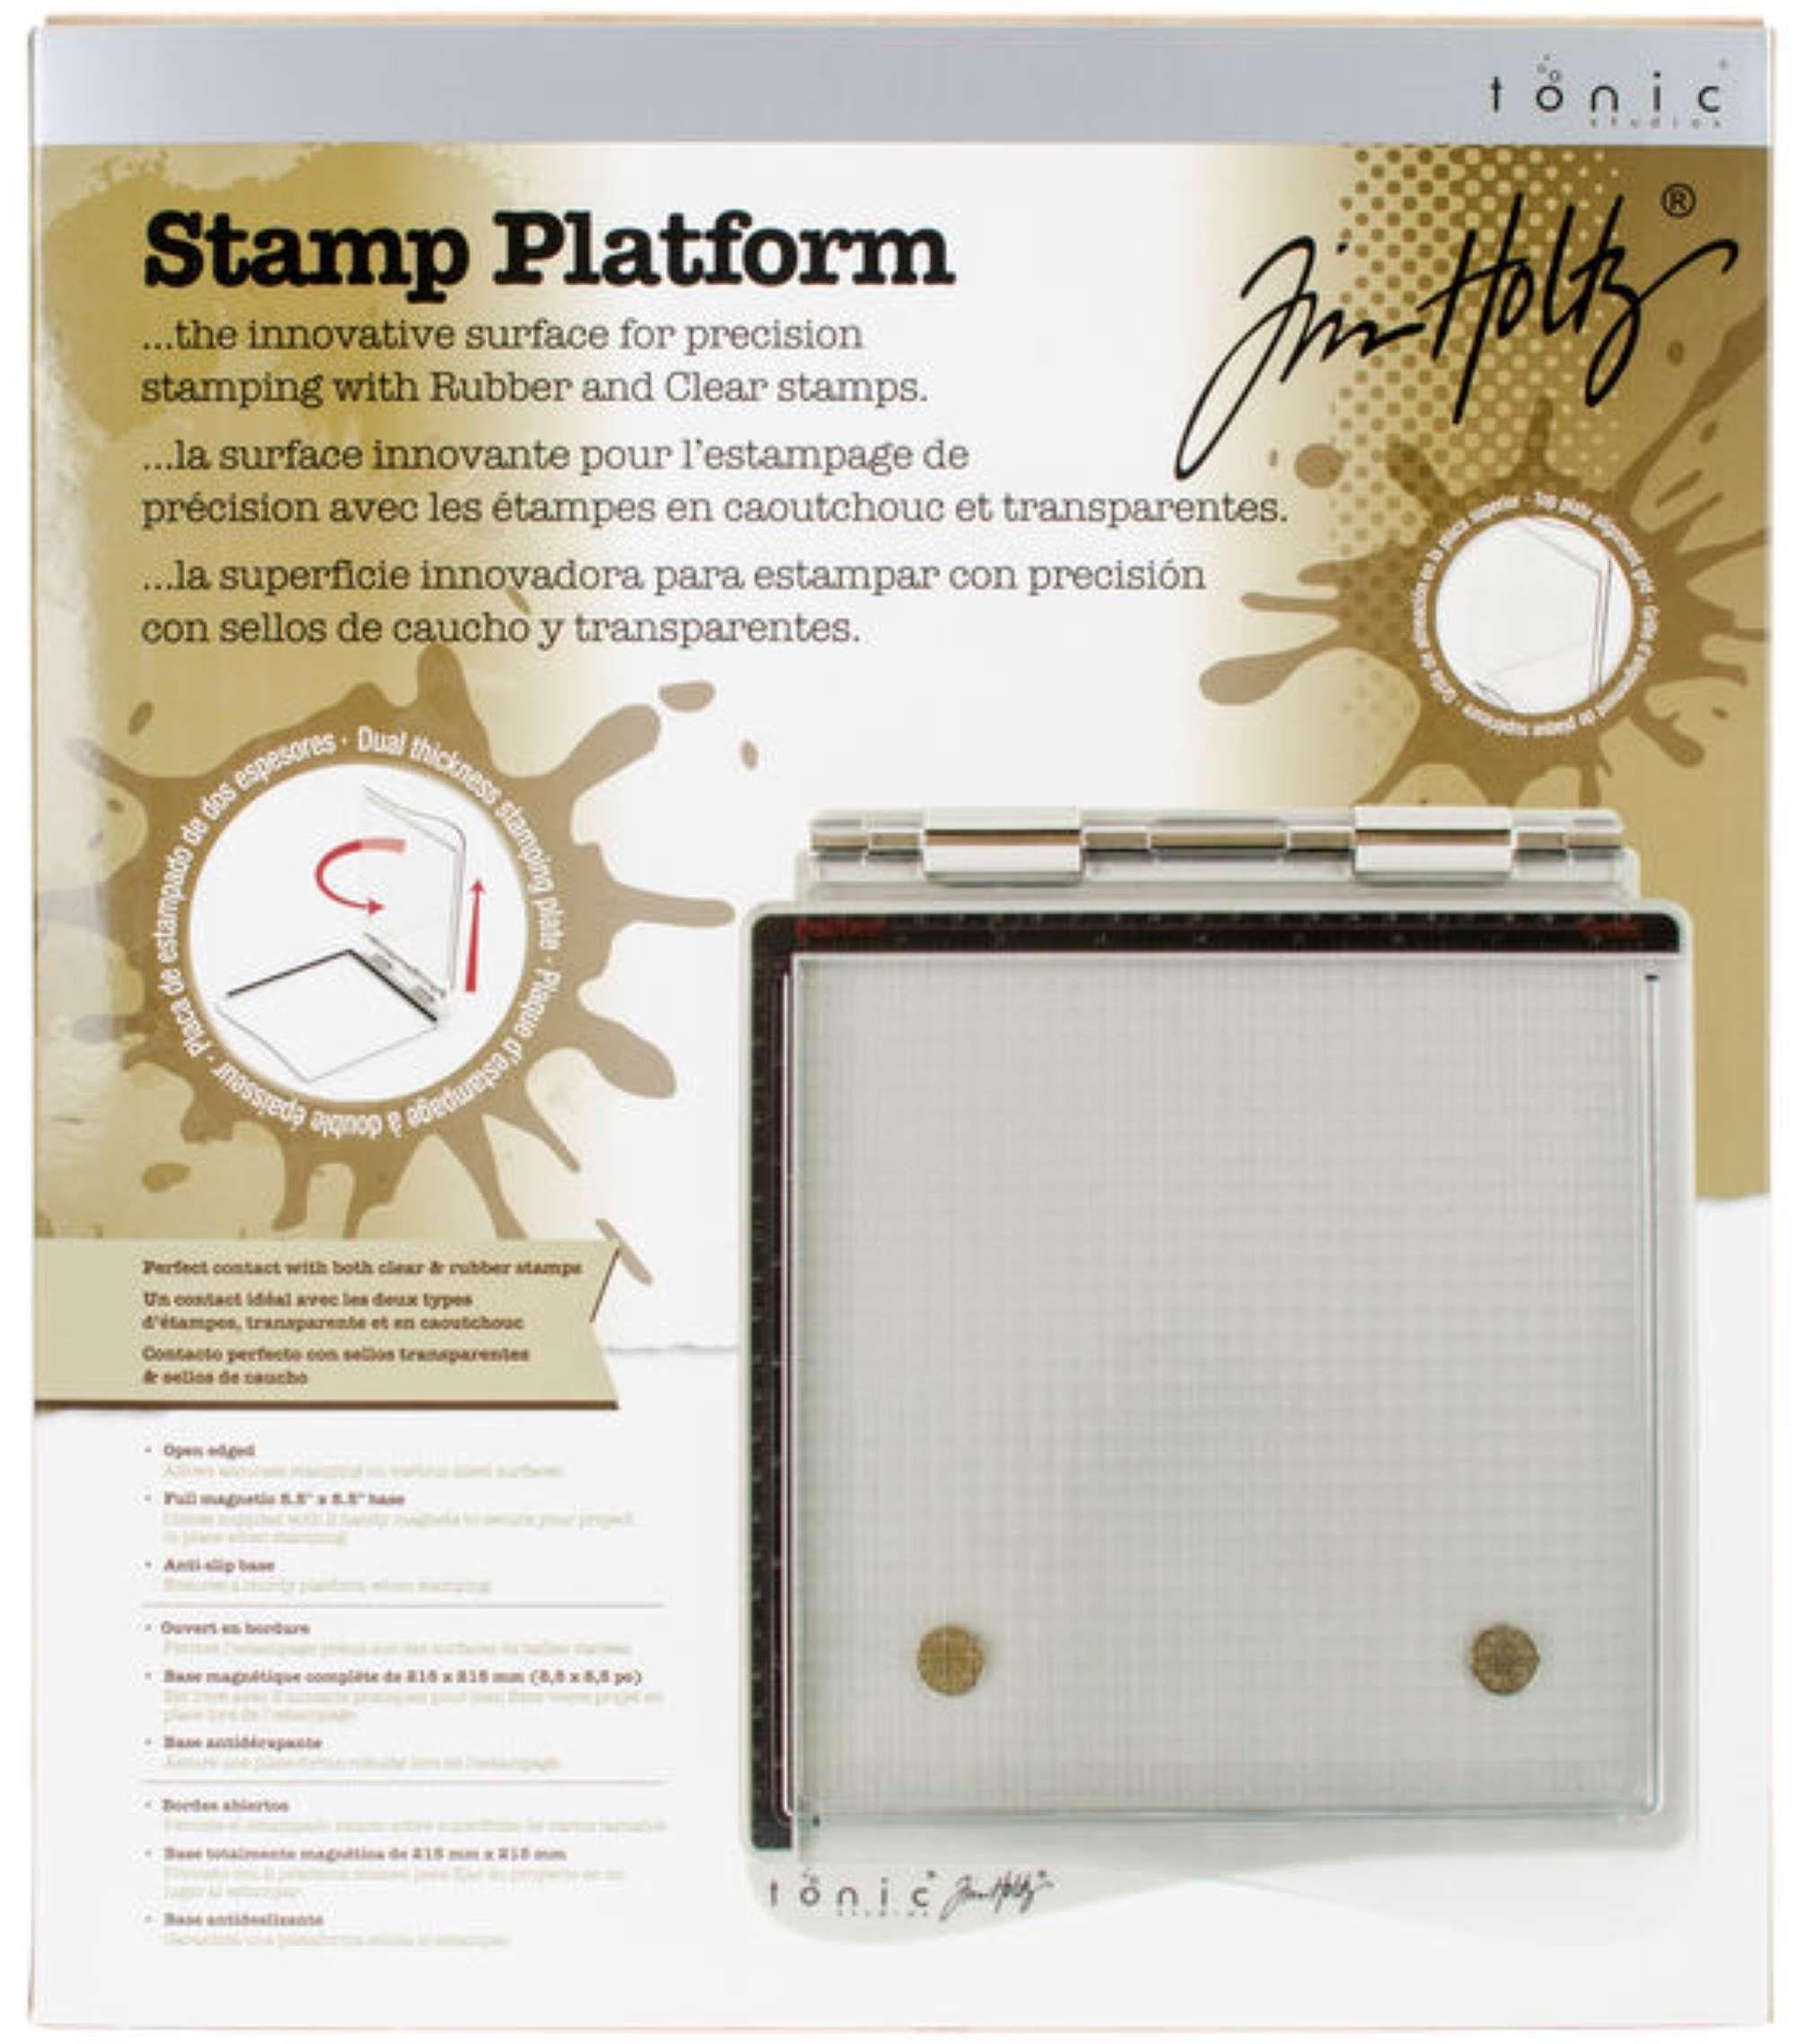 NEW VERSION Easy Stamp Platform Tool, Stamping Platform + Alignment Stamp  +Two Magnets, 4 pc for Accurate Craft Stamping